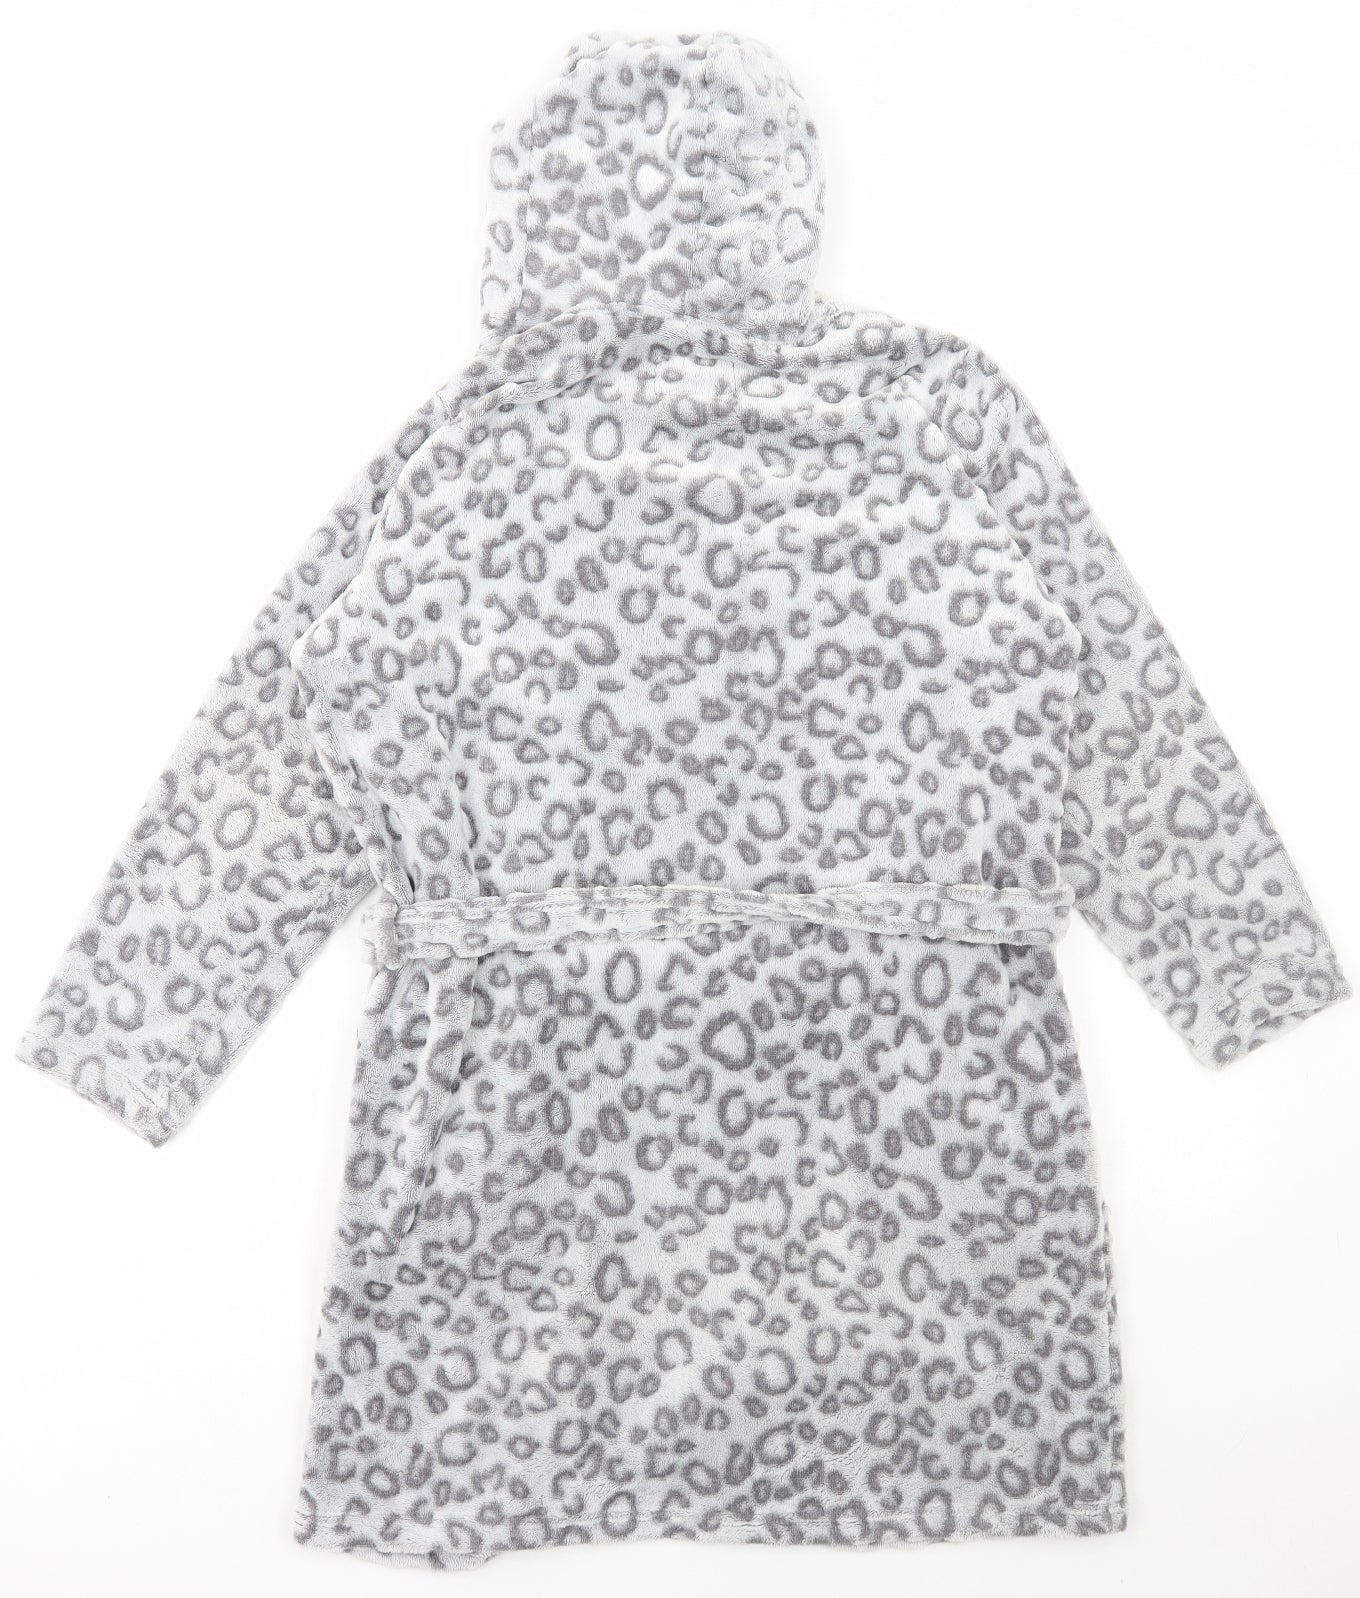 Young Dimension Girls Grey Animal Print Polyester Gown Size 10-11 Years Tie - Leopard Print